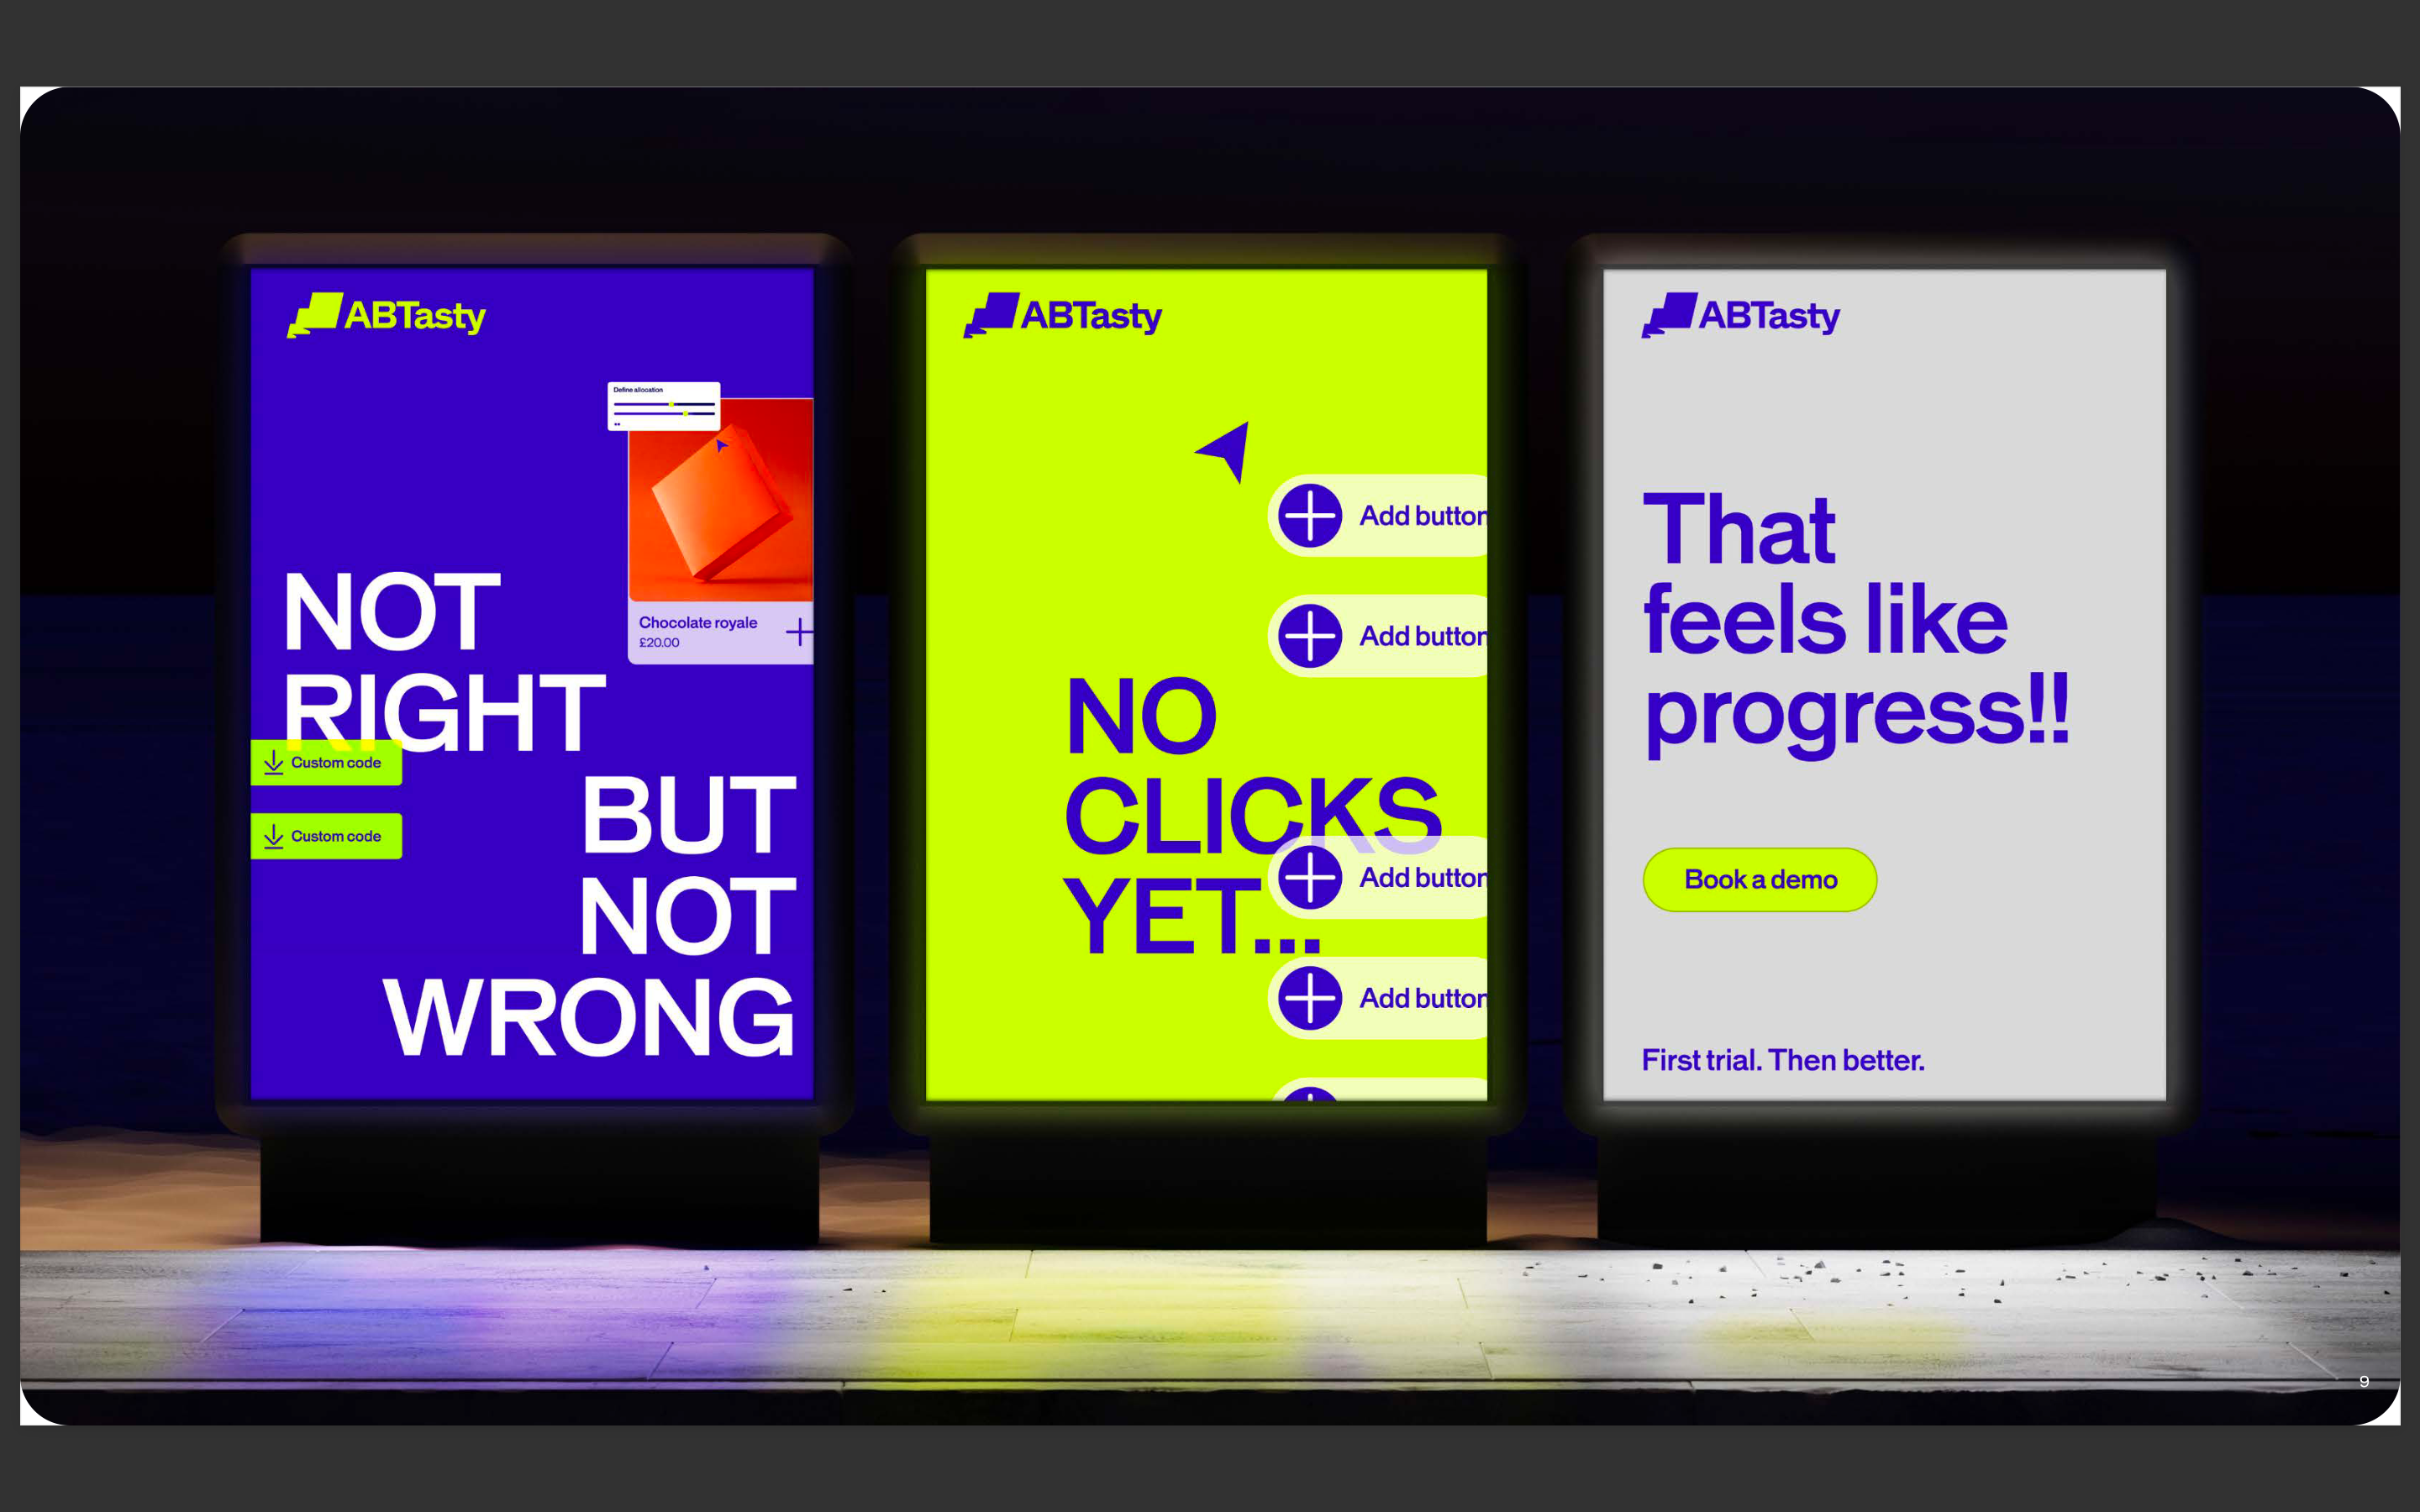 Passing with flying colours: AB Tasty’s new brand identity is rendered in “experimentation blue” and “crash test yellow”